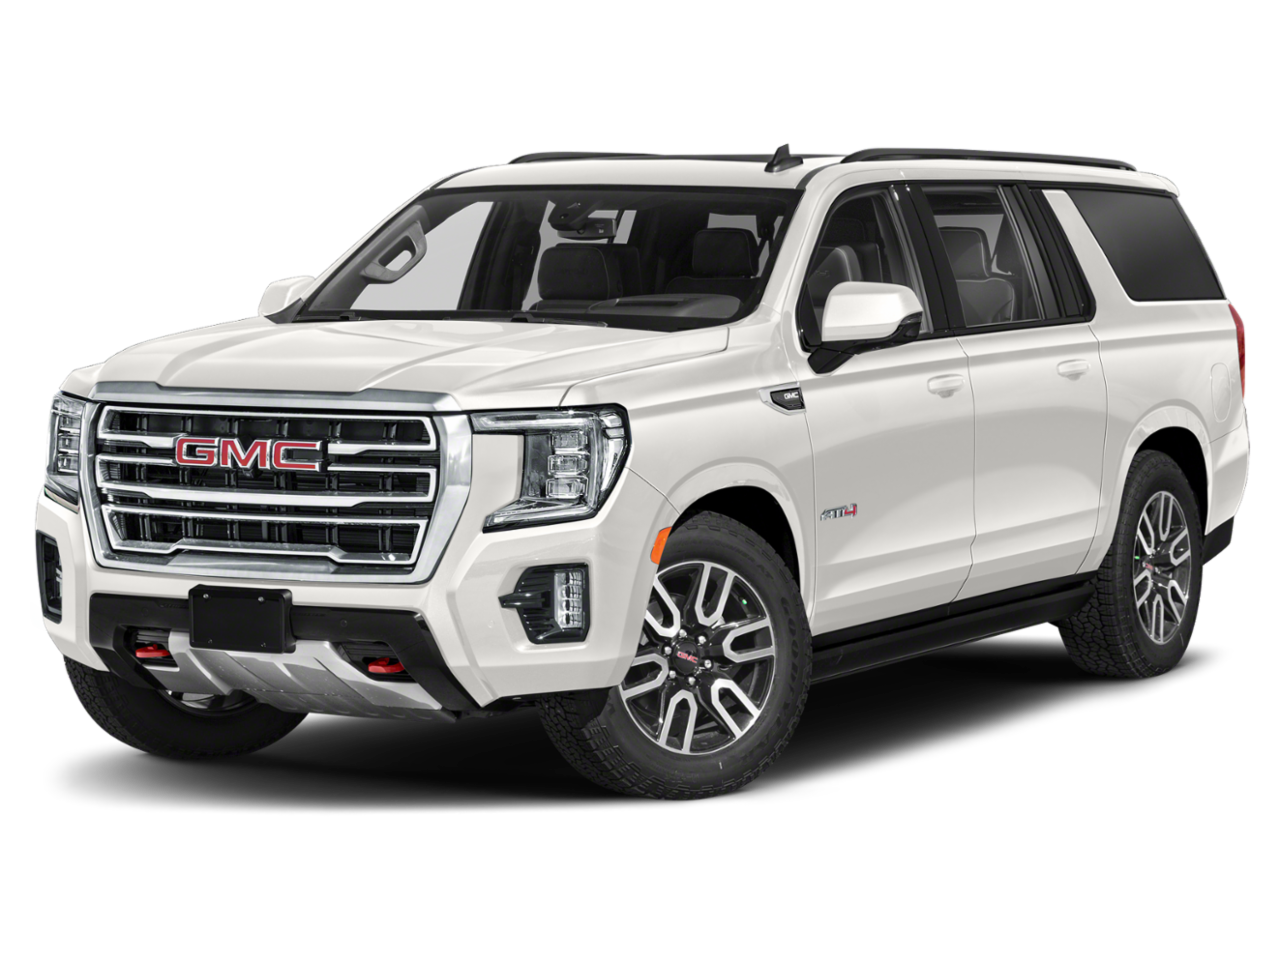 Discover The New 2020 Gmc Yukon Xl For Sale At Mcgovern Buick Gmc Rm